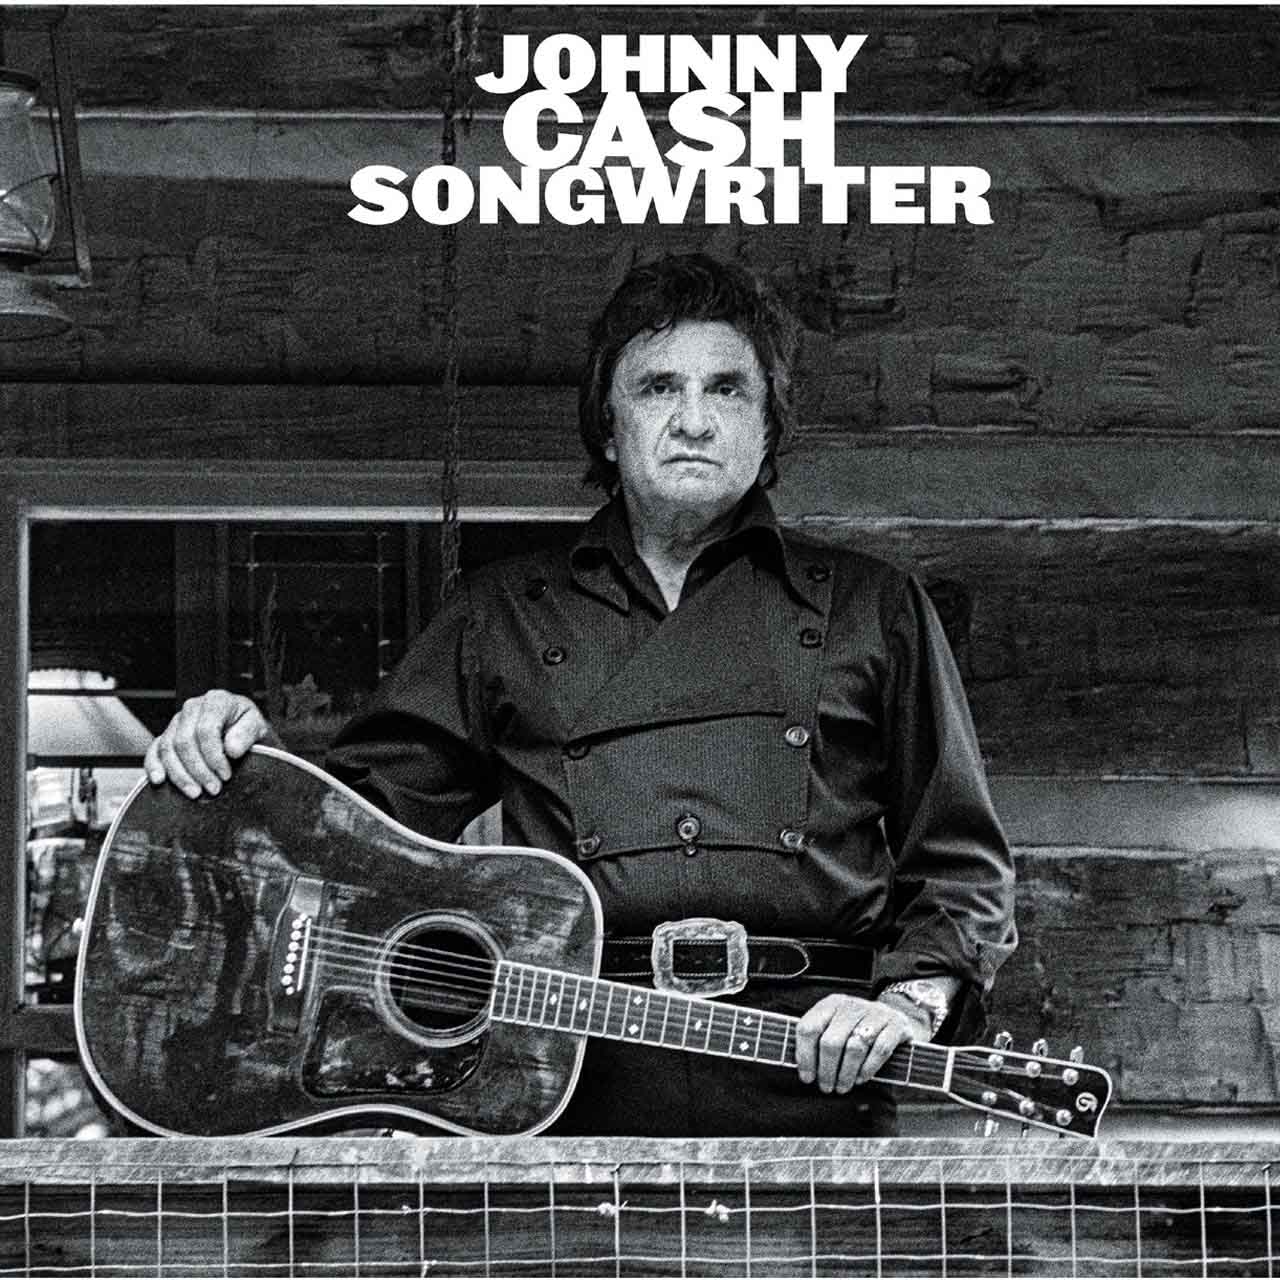 Johnny Cash’s ‘Songwriter’ Album Is Out Now